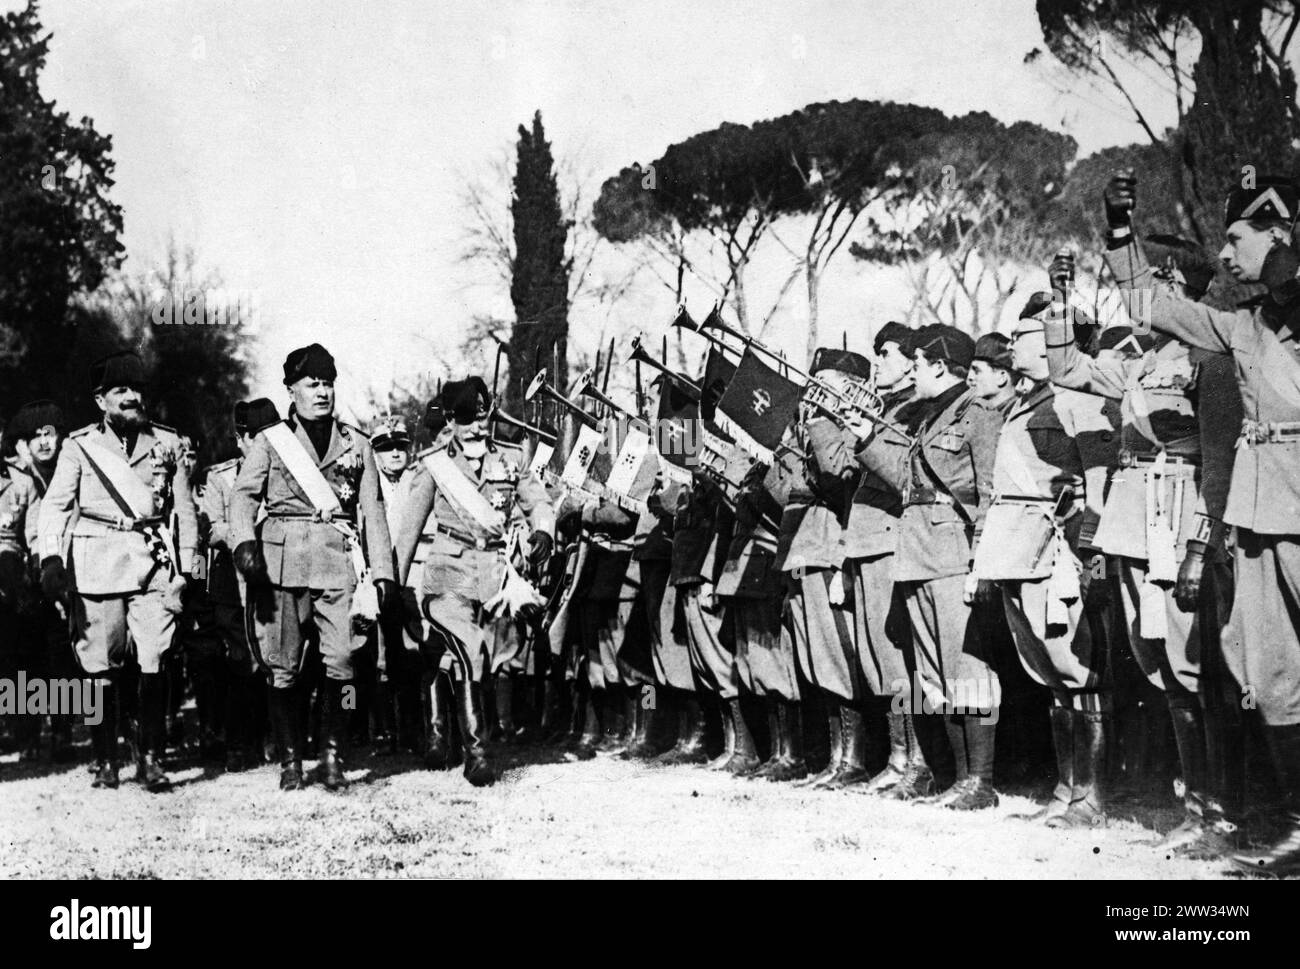 Benito Mussolini (1883-1945) inspecting his troops - World War II Stock Photo